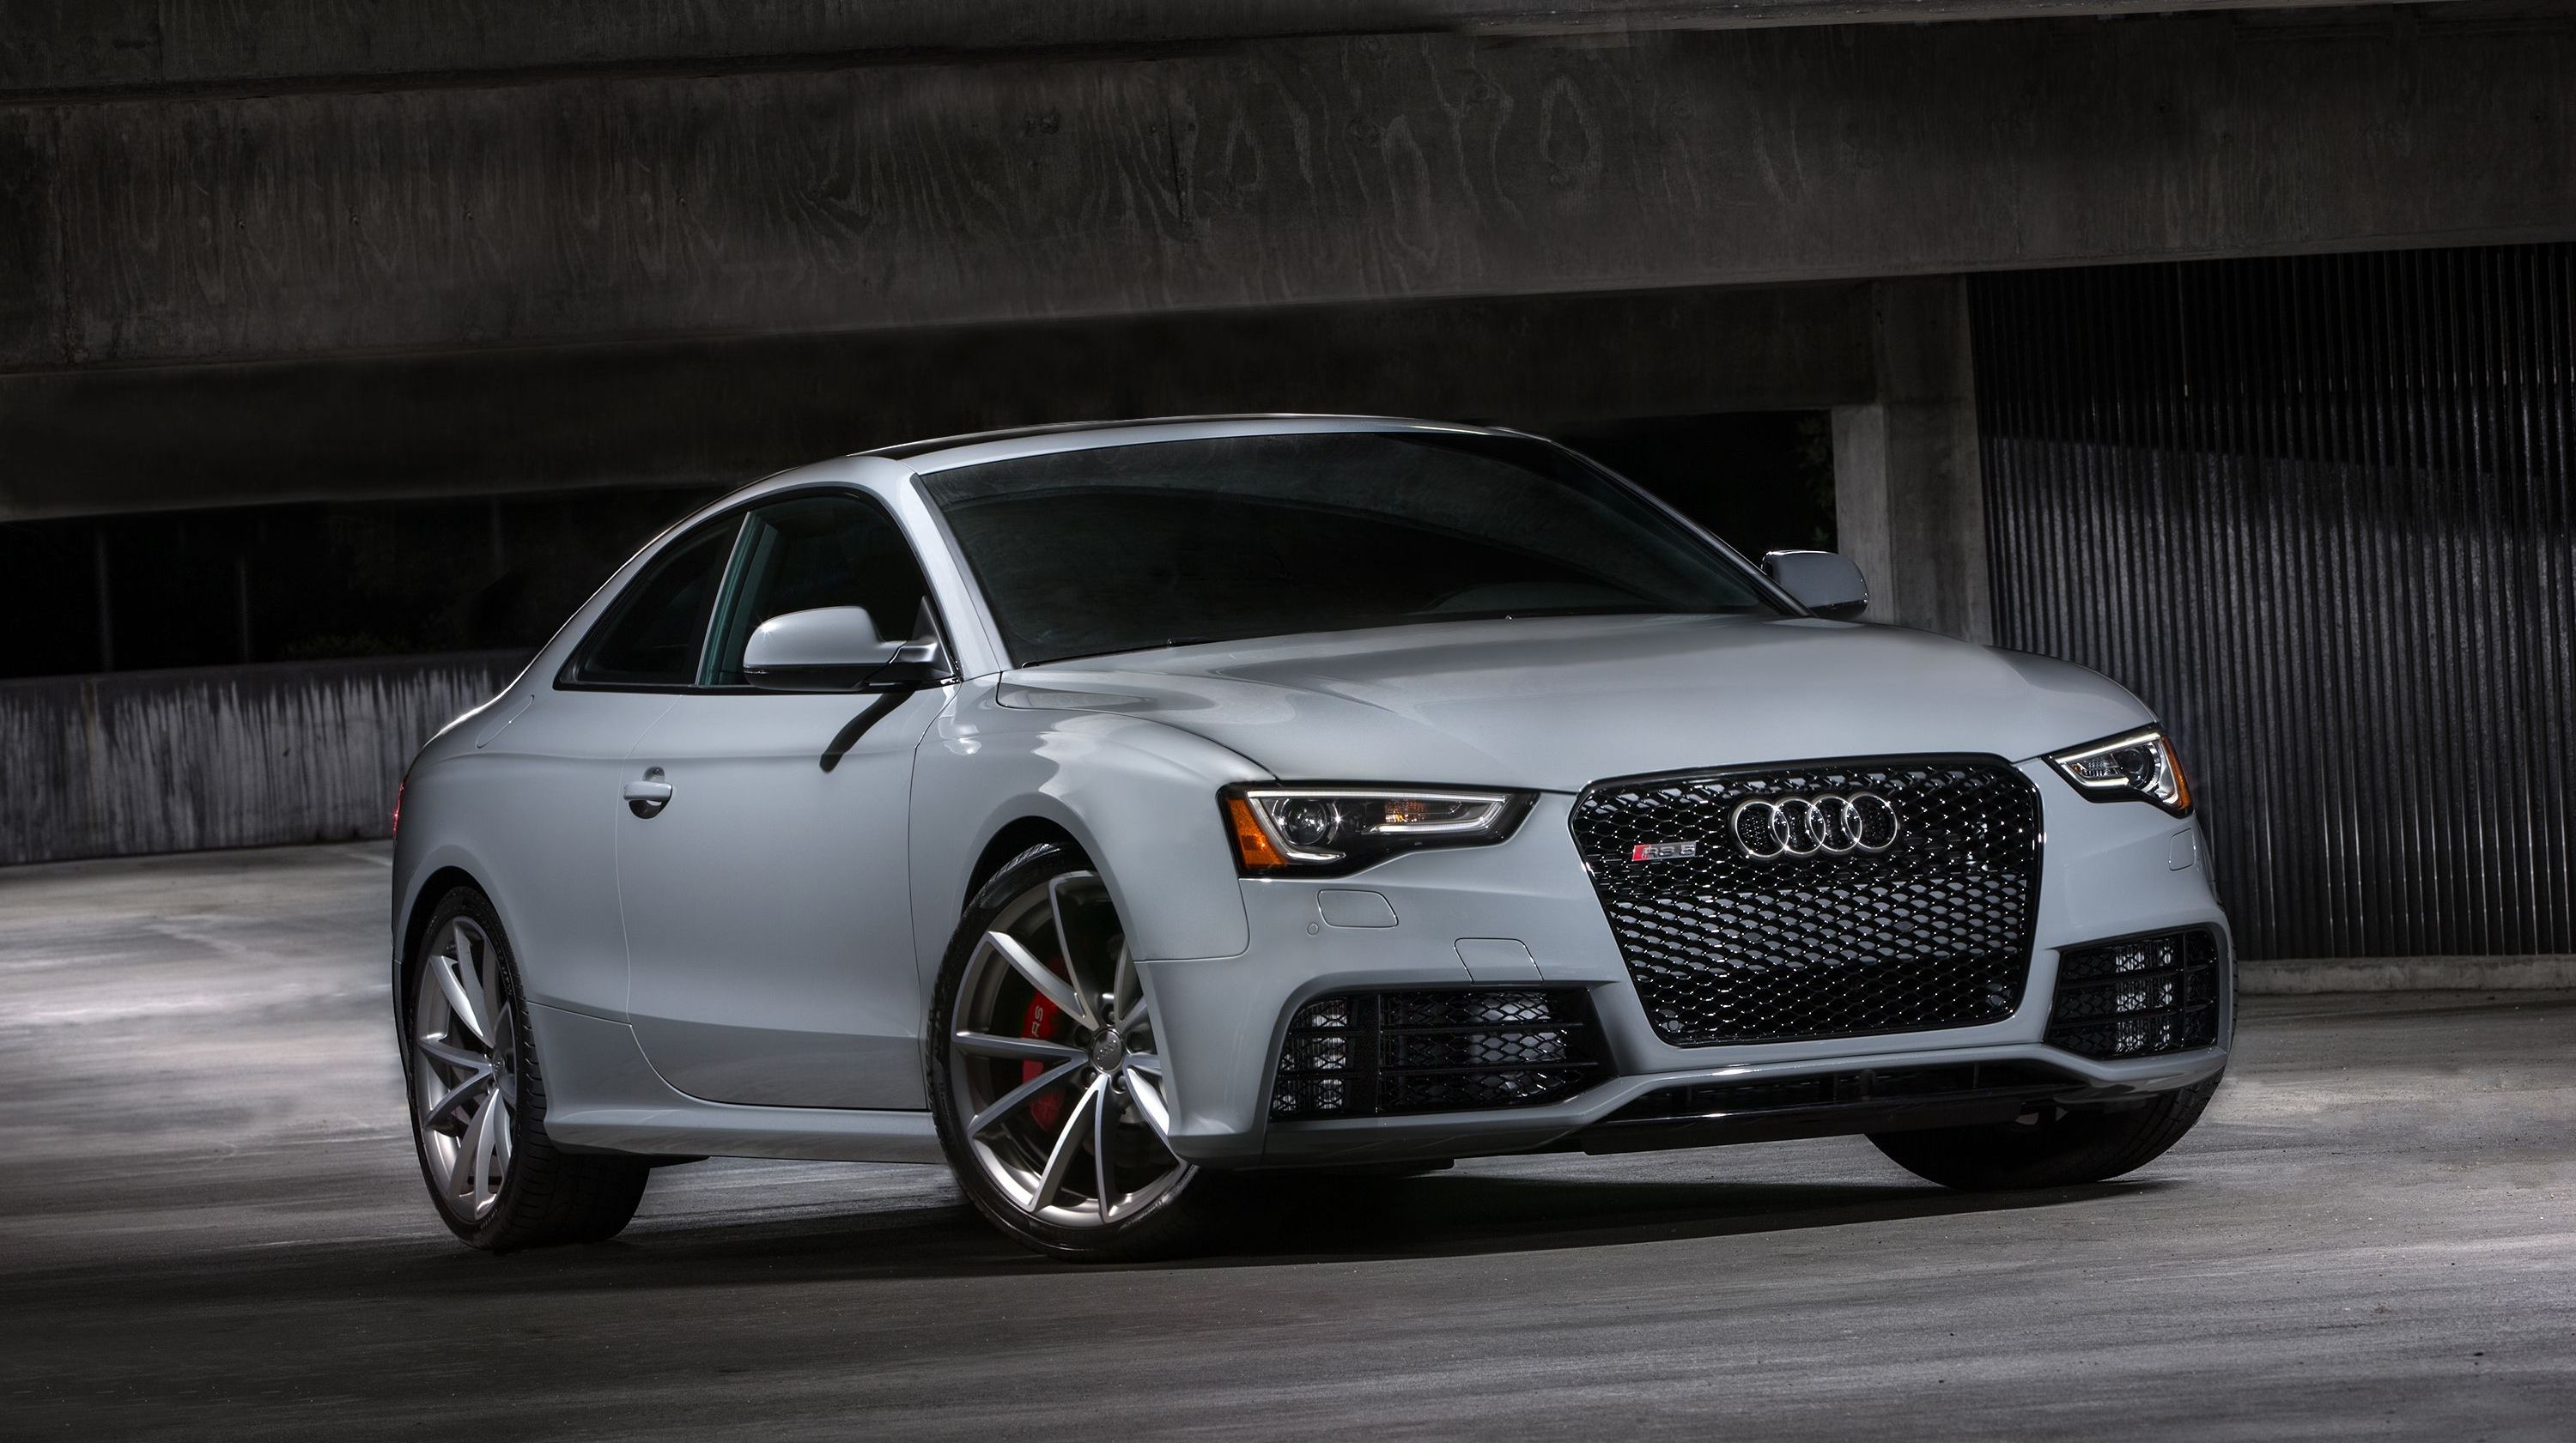  The RS 5 Sport Edition is sharp, but is it really worth the massive price hike relative to the base RS 5?